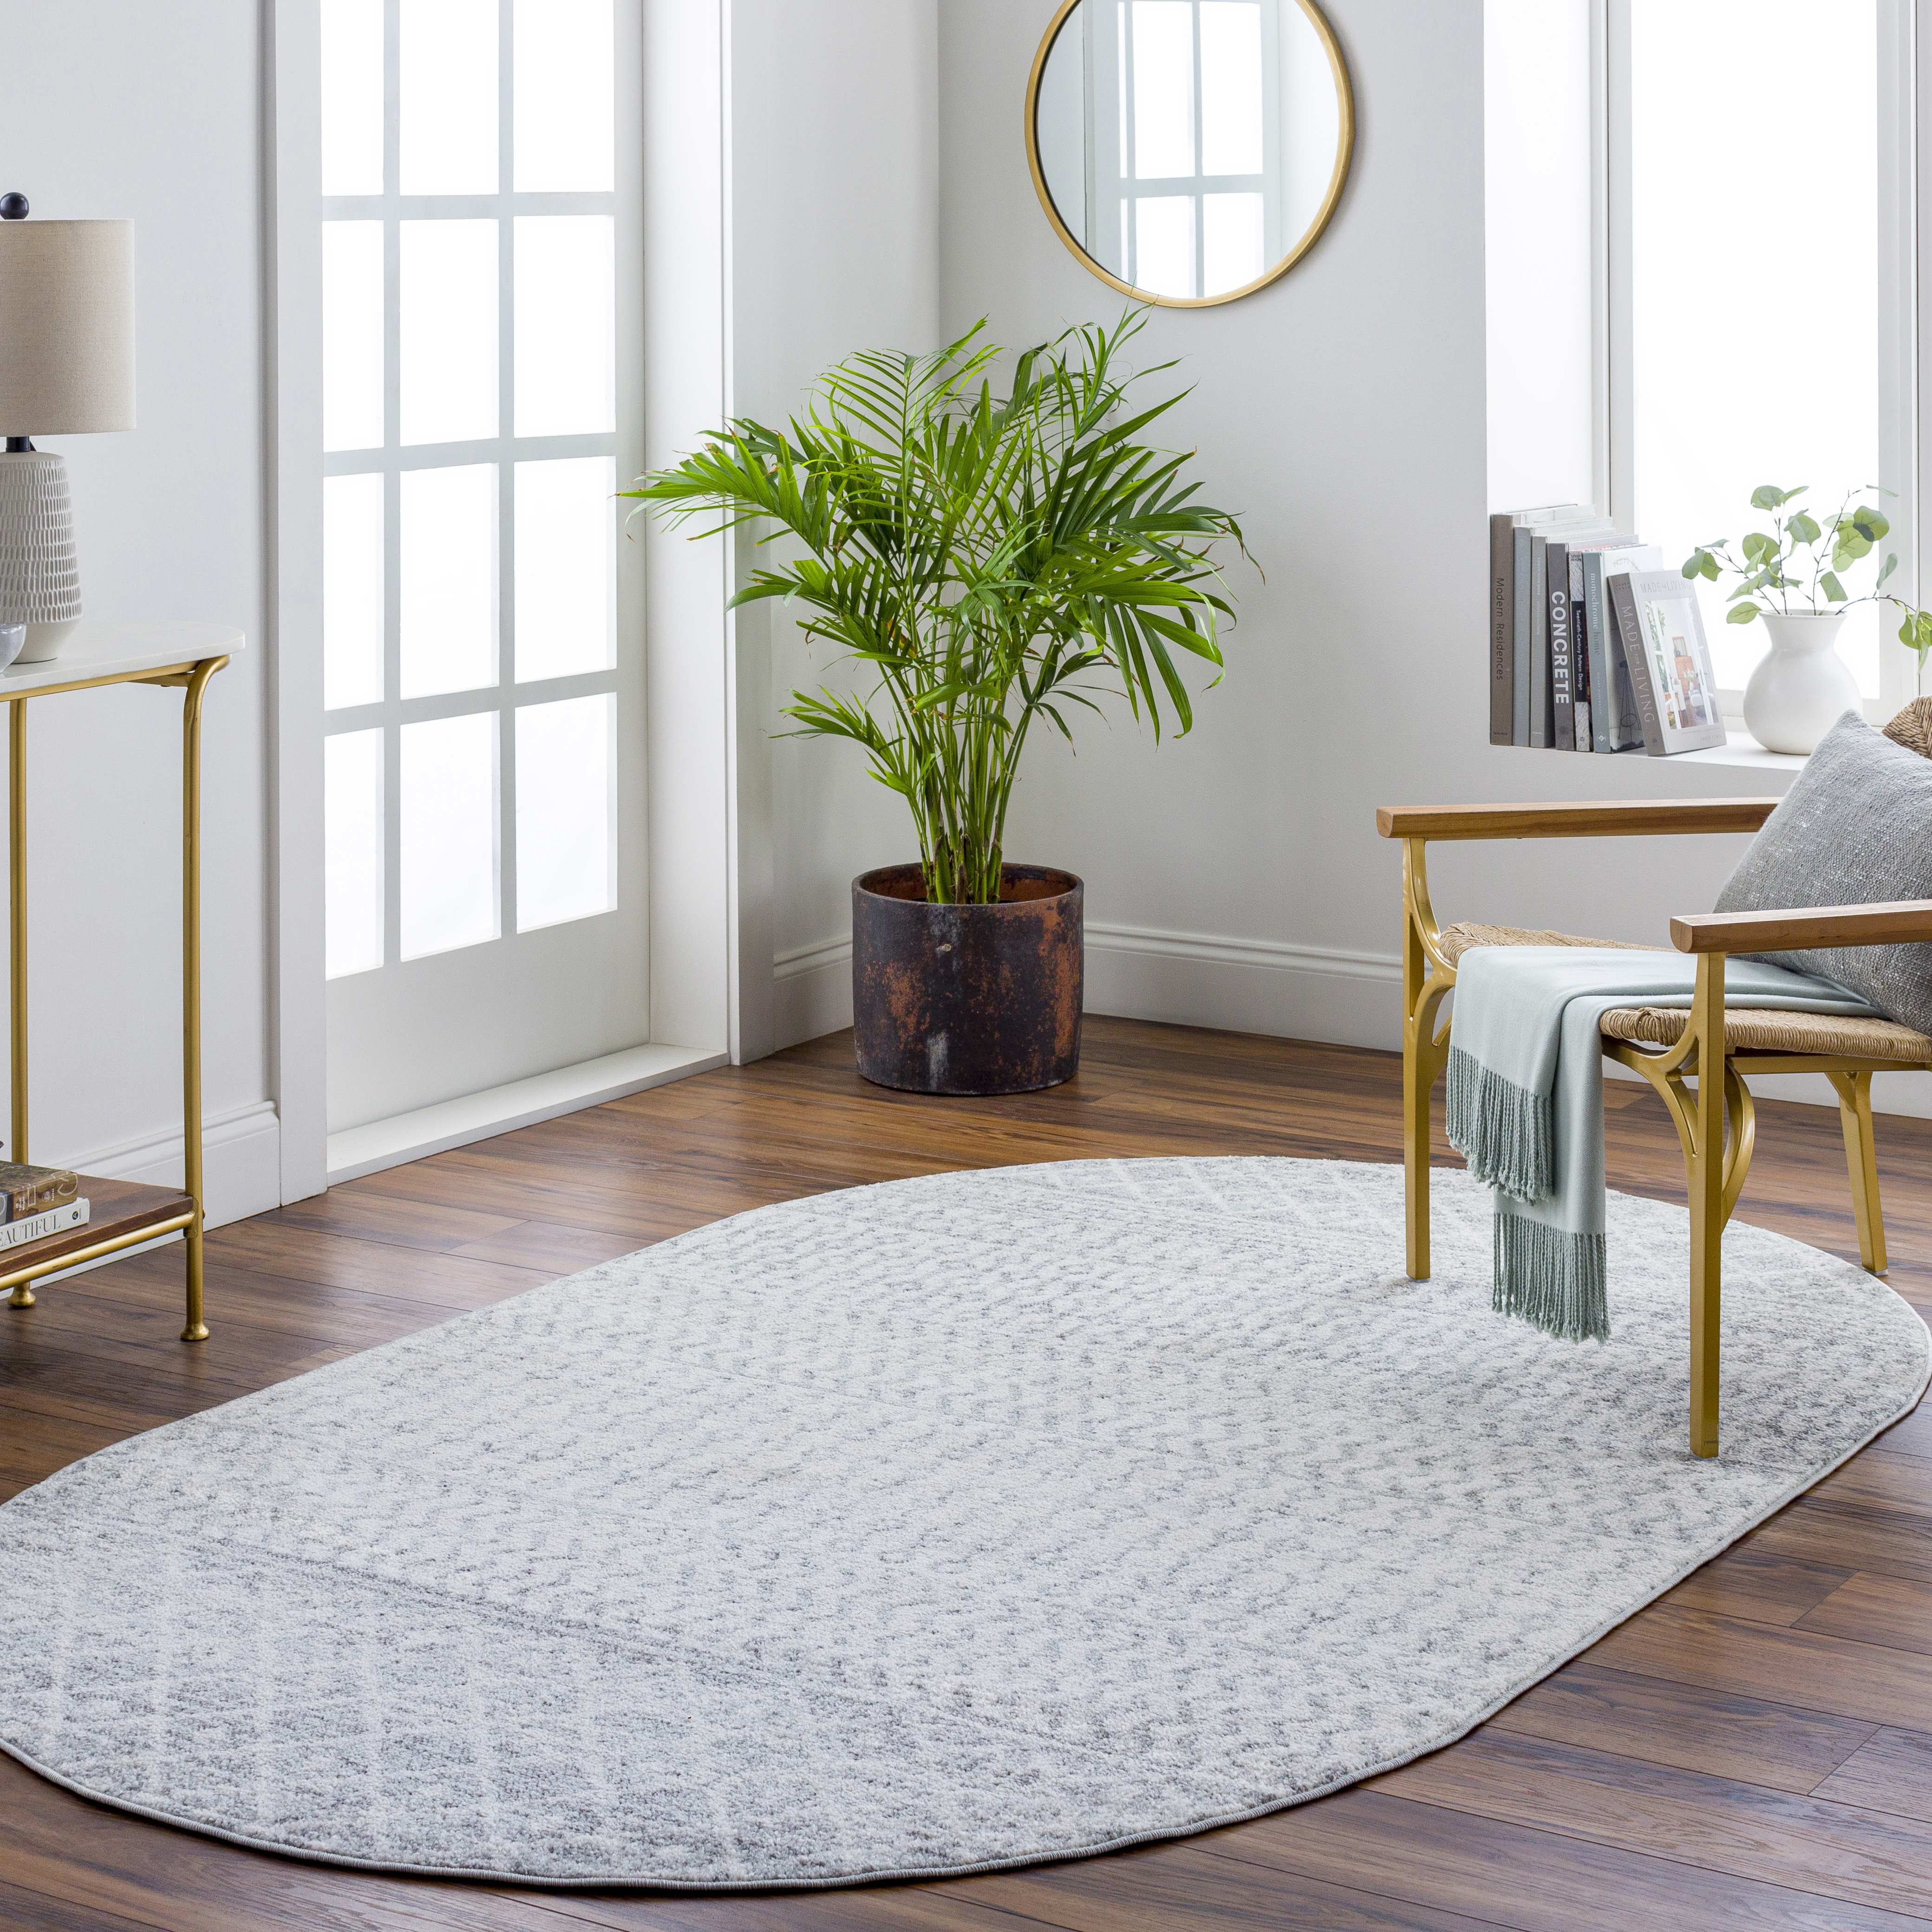 Mark&Day Area Rugs, 5x7 Louise Global Light Gray White Oval Area Rug (5' x  8' Oval)